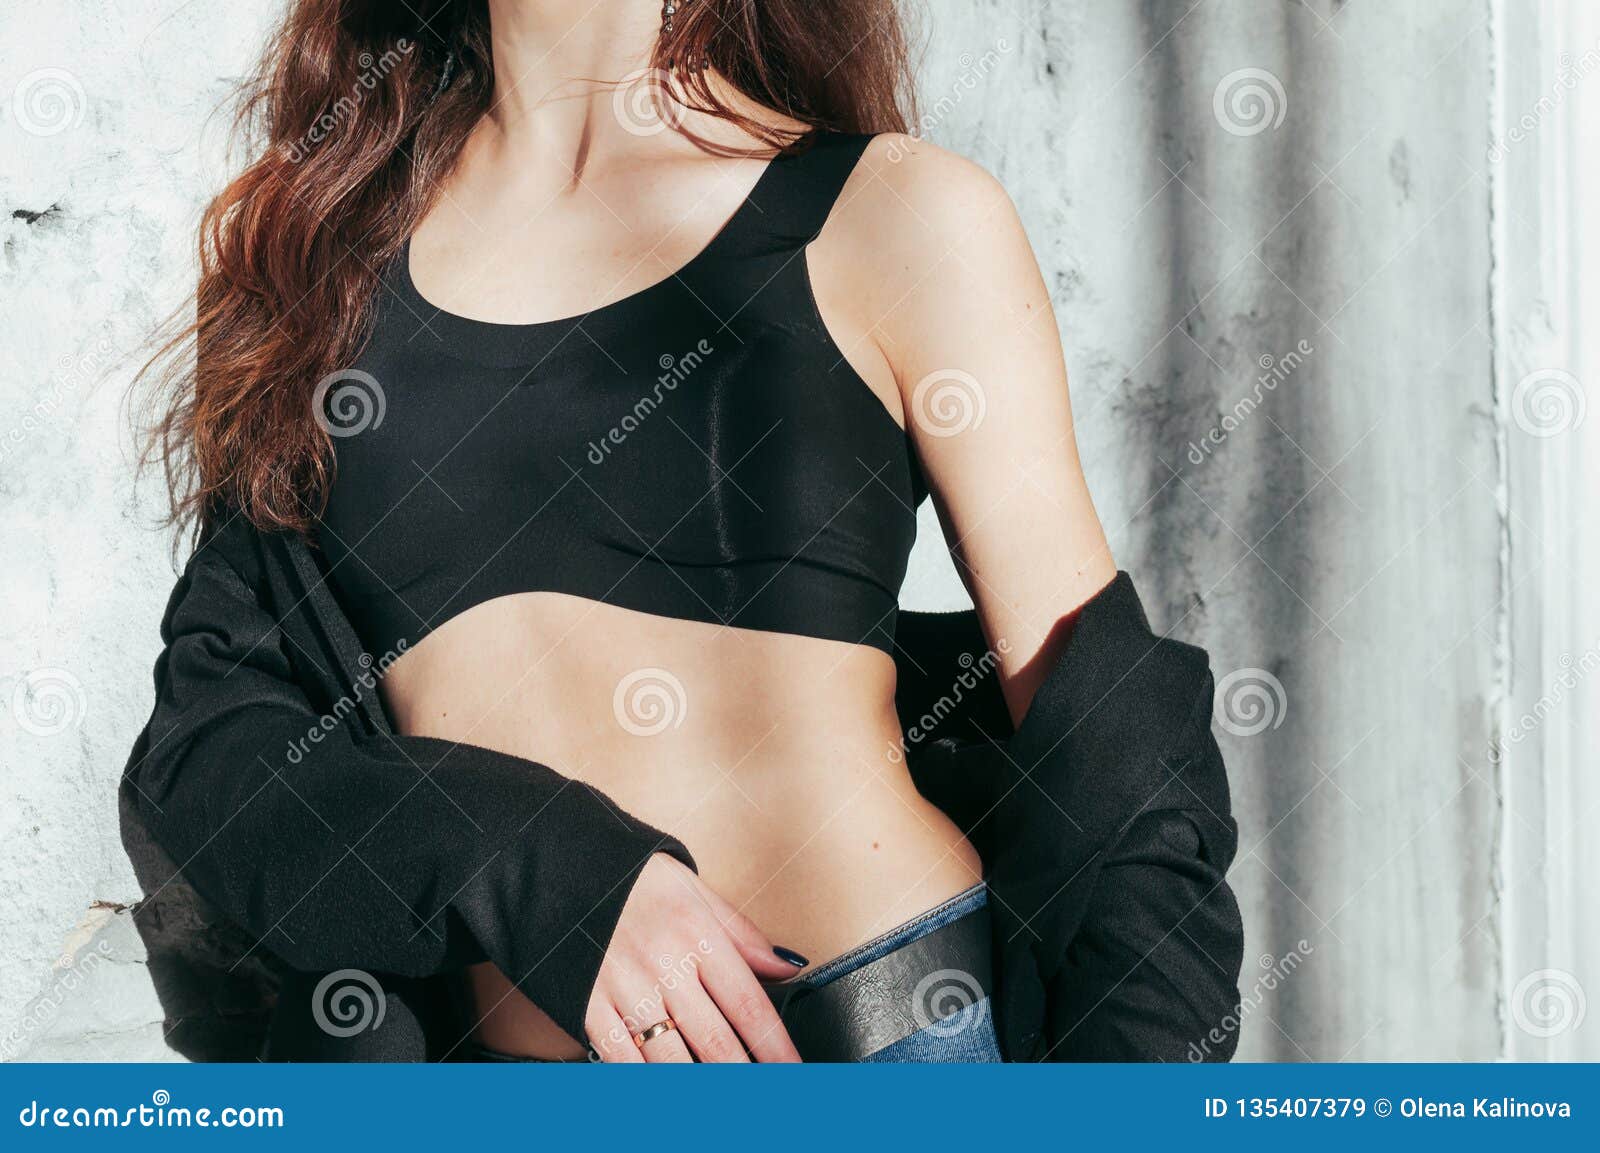 https://thumbs.dreamstime.com/z/fit-girl-black-jacket-bra-fashion-slender-style-perfect-skin-tone-long-nut-brown-hair-concept-clothes-catalog-135407379.jpg